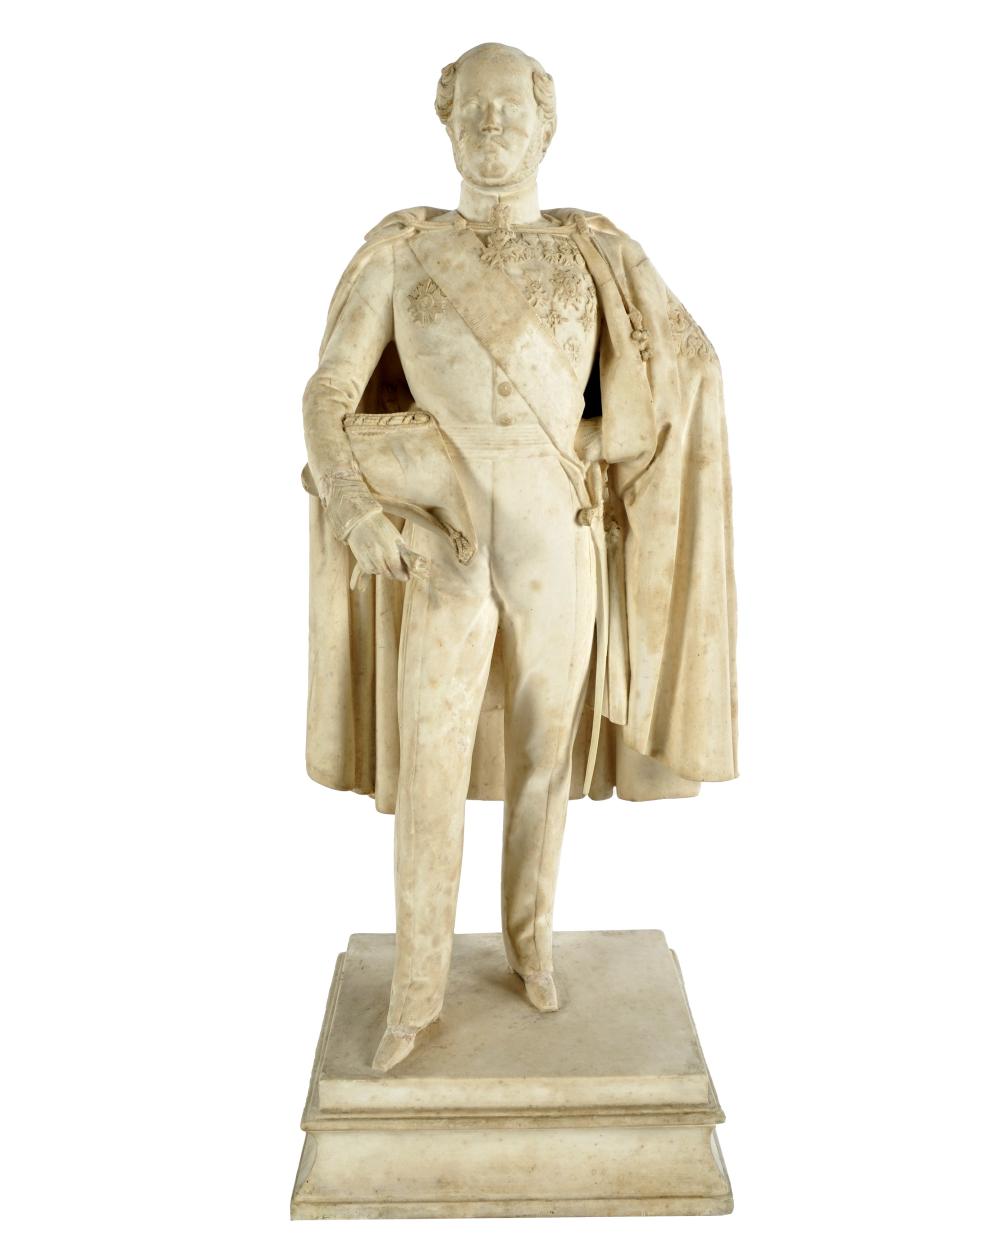 JEAN-AUGUSTE BARRE (FRENCH 1811